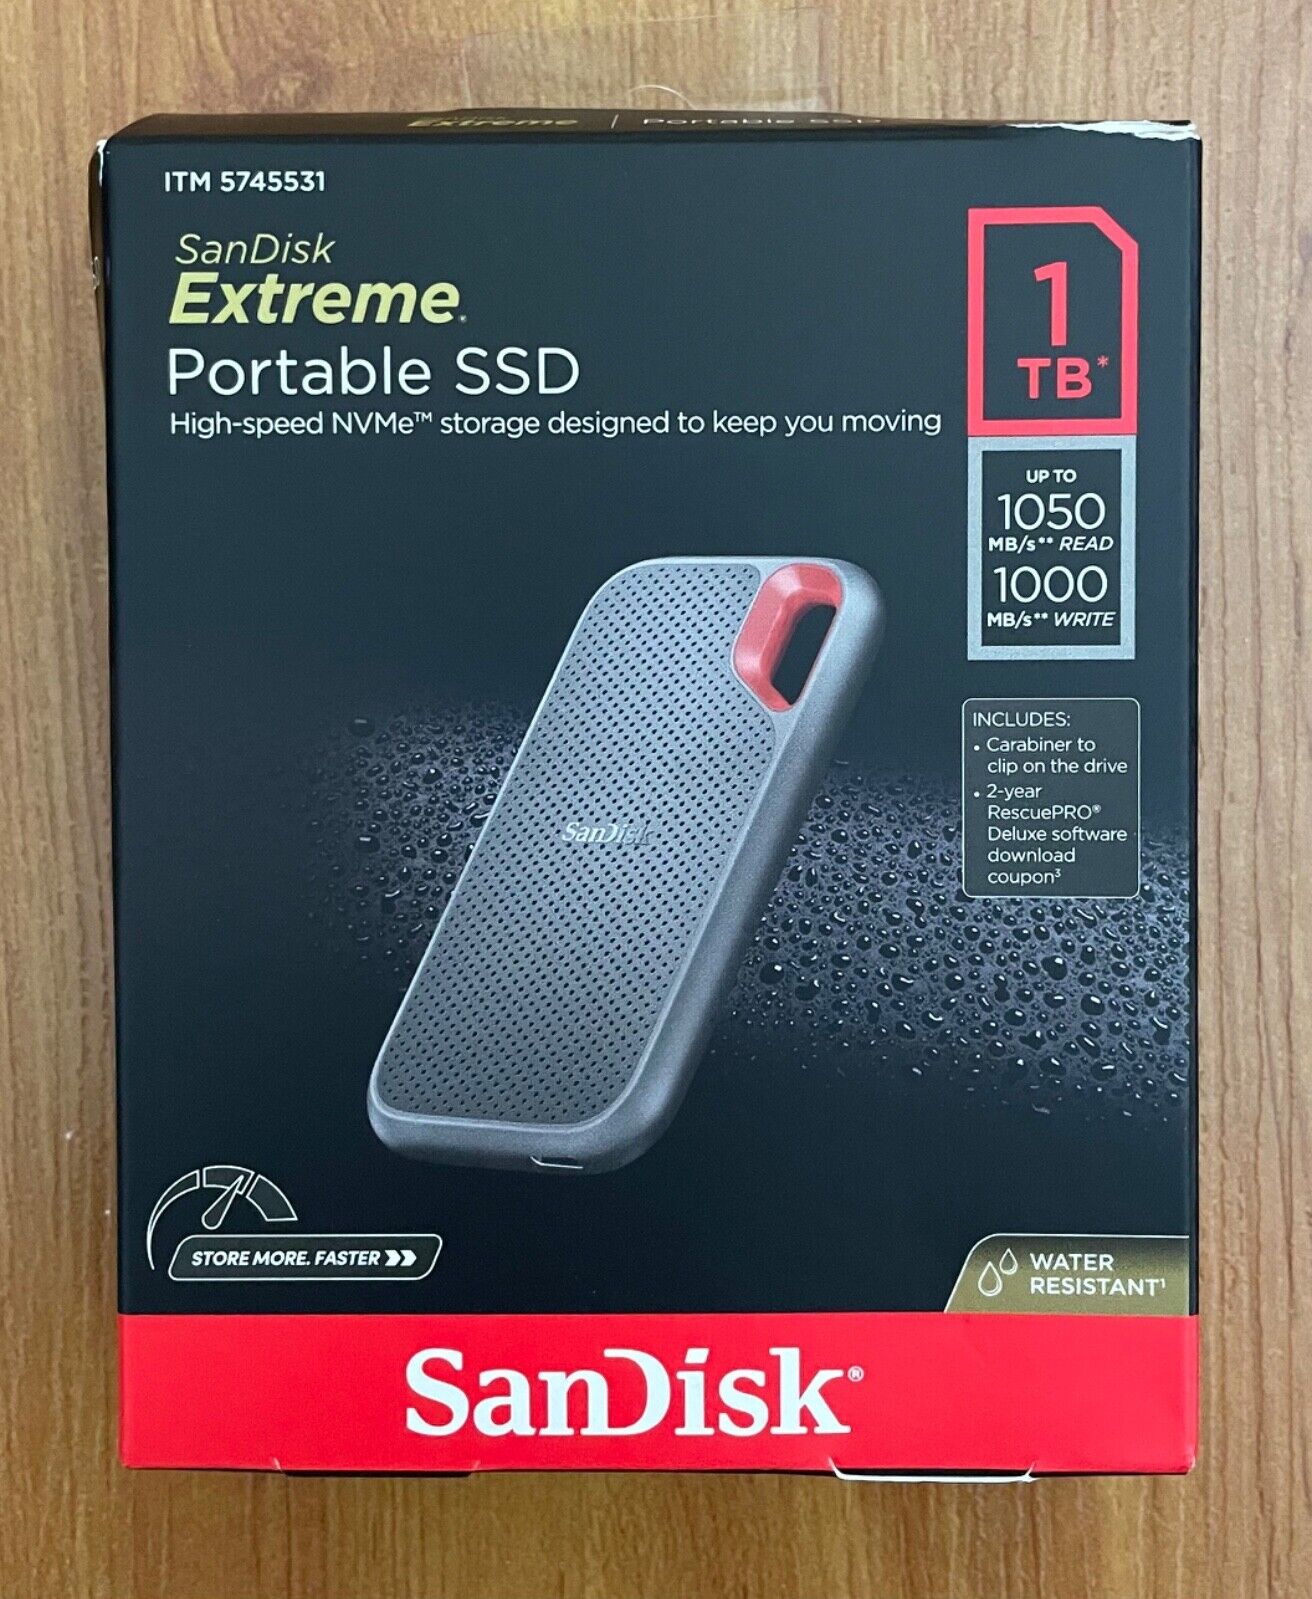 SanDisk 1TB Extreme Portable SSD Brand New and Sealed